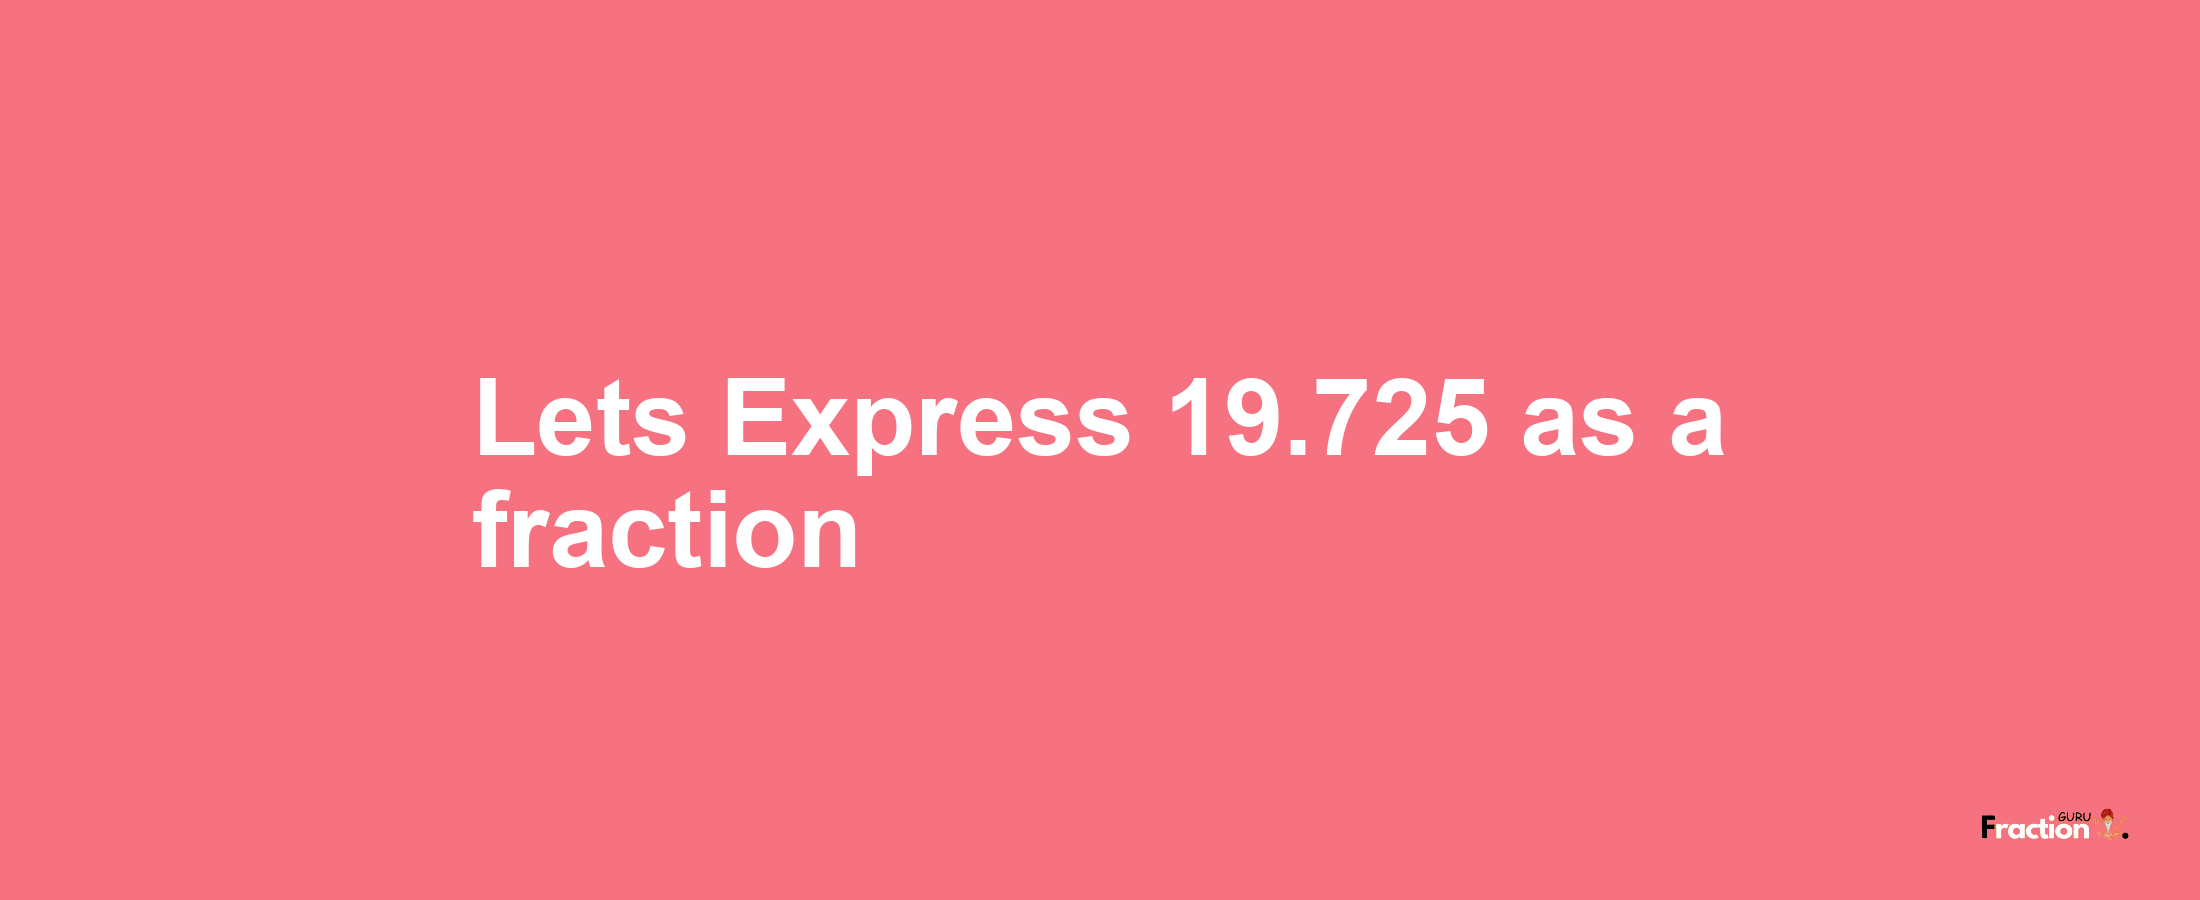 Lets Express 19.725 as afraction